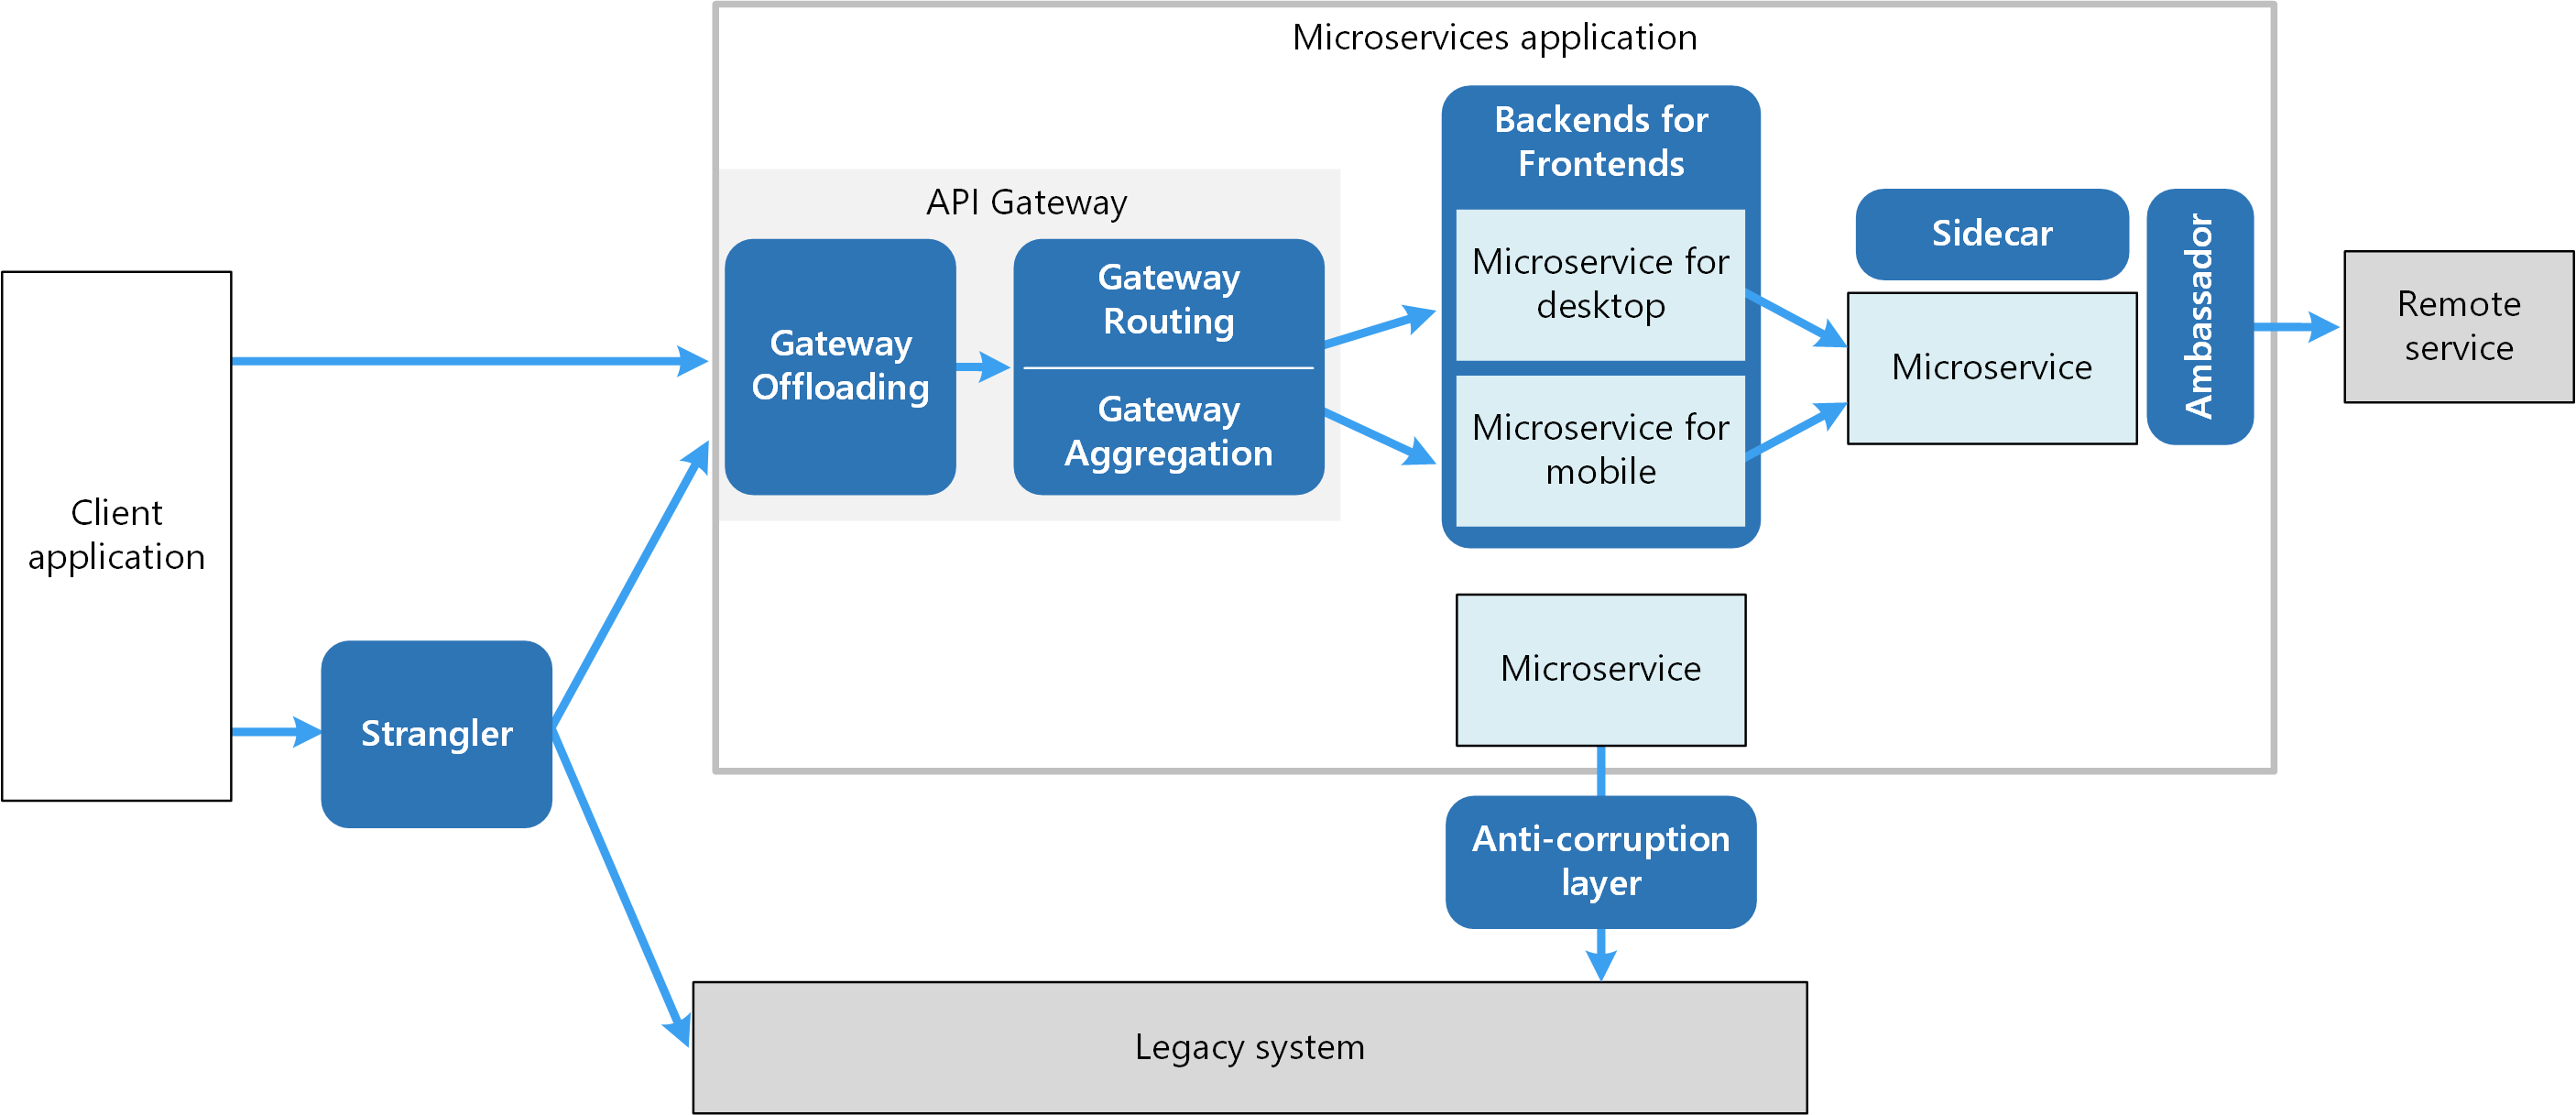 Microservices design patterns